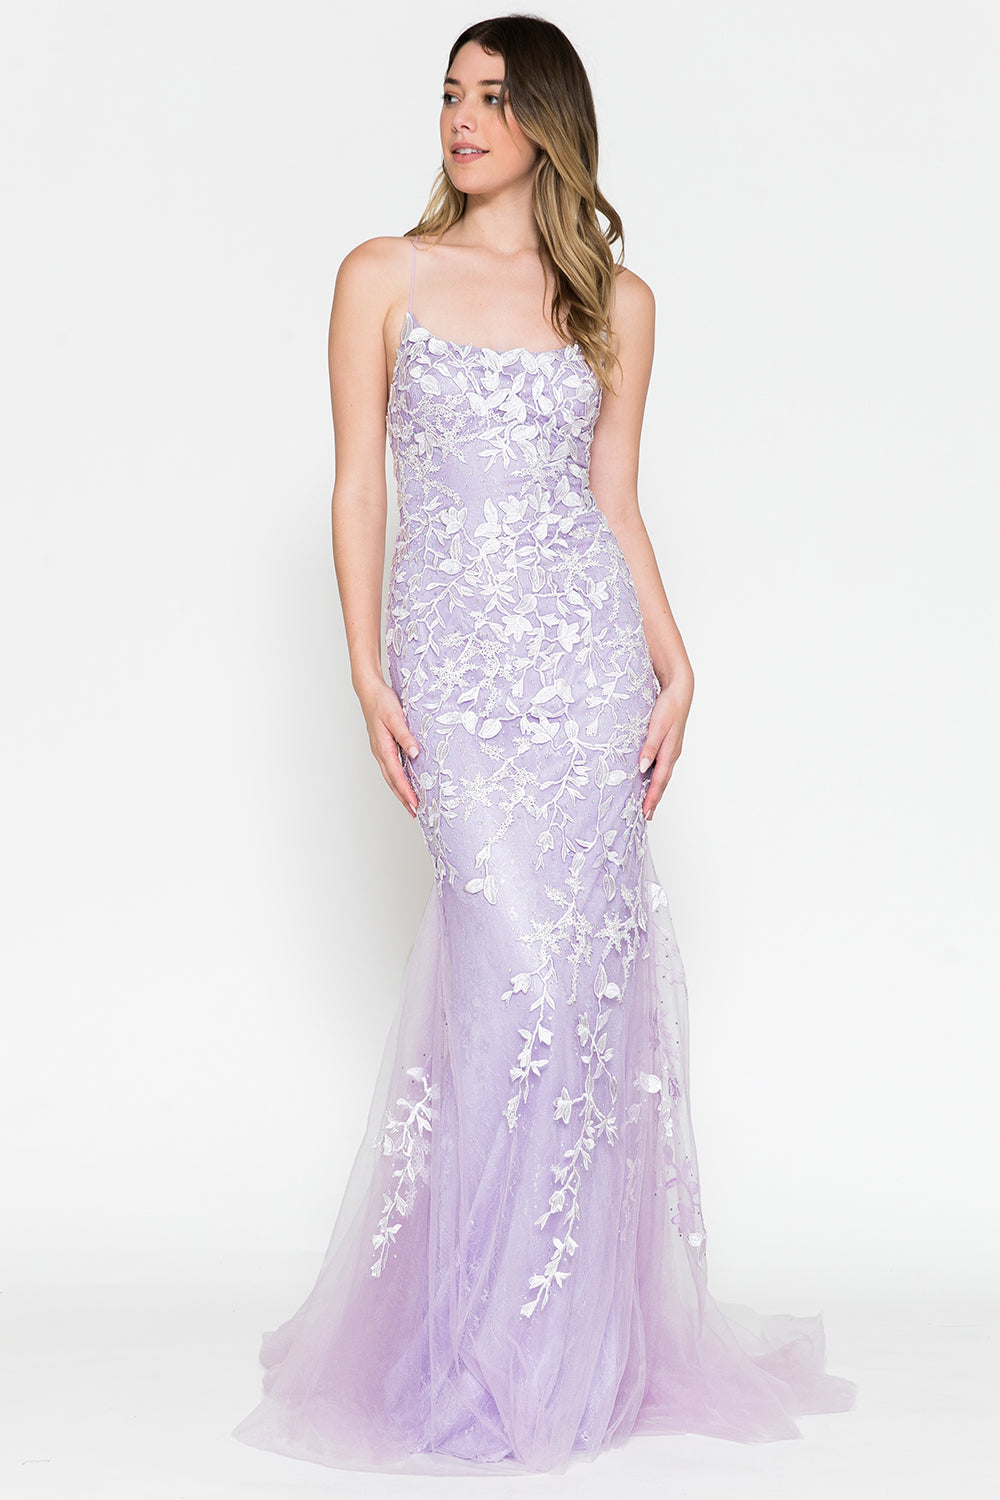 Embroidered Lace Straight Across Mermaid Tail Long Prom Dress AC799 Elsy Style Prom Dress